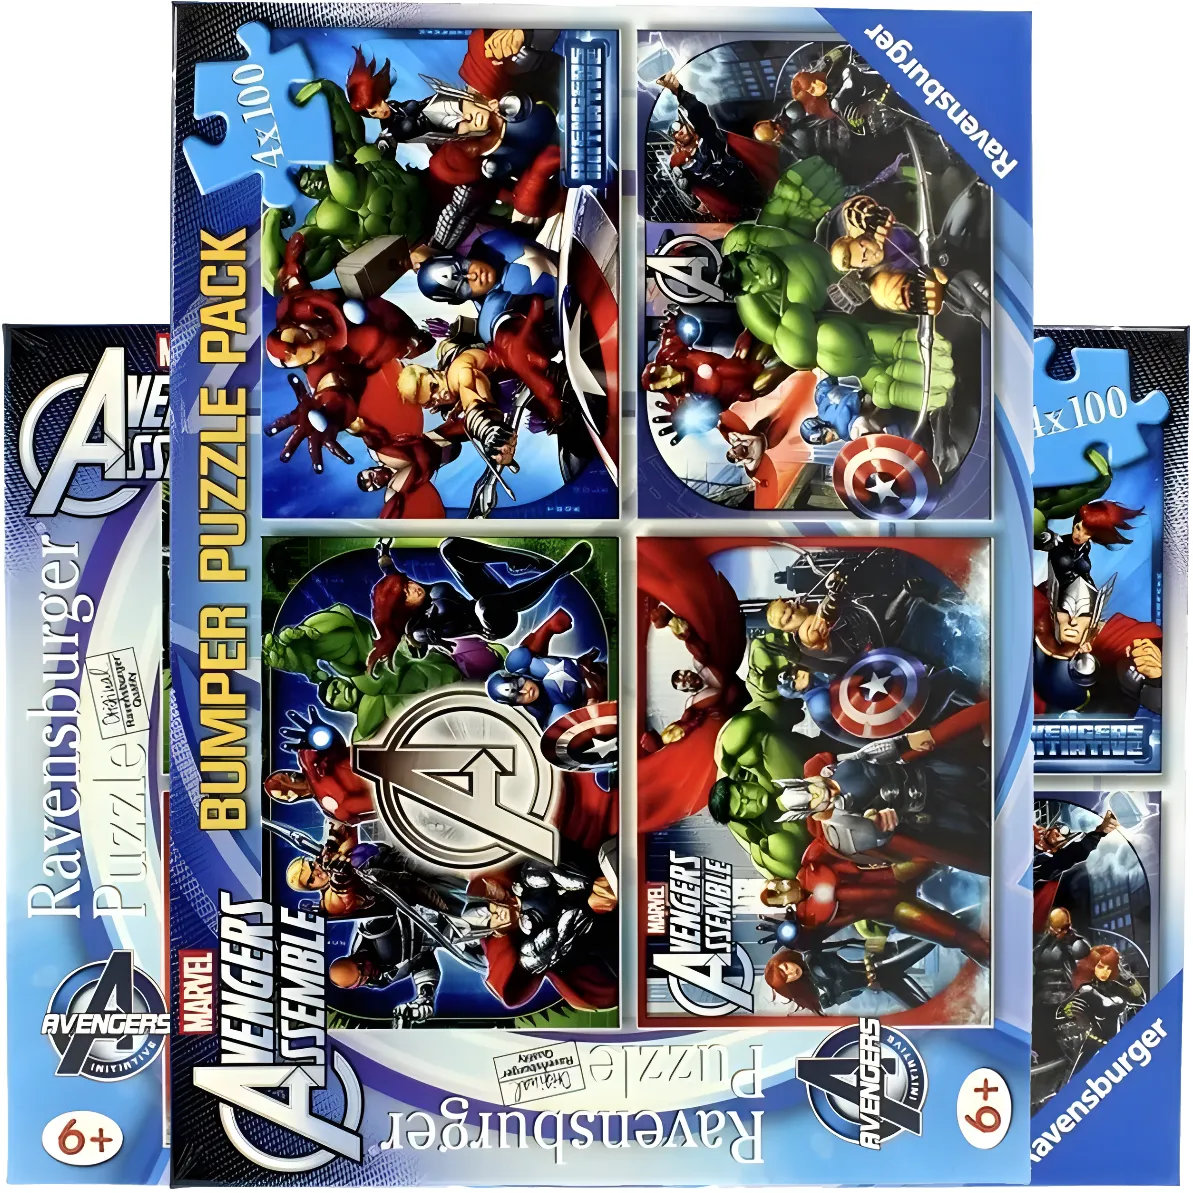 Free Avengers 4 X 100 Piece Bumper Pack Jigsaw Puzzle After Cashback